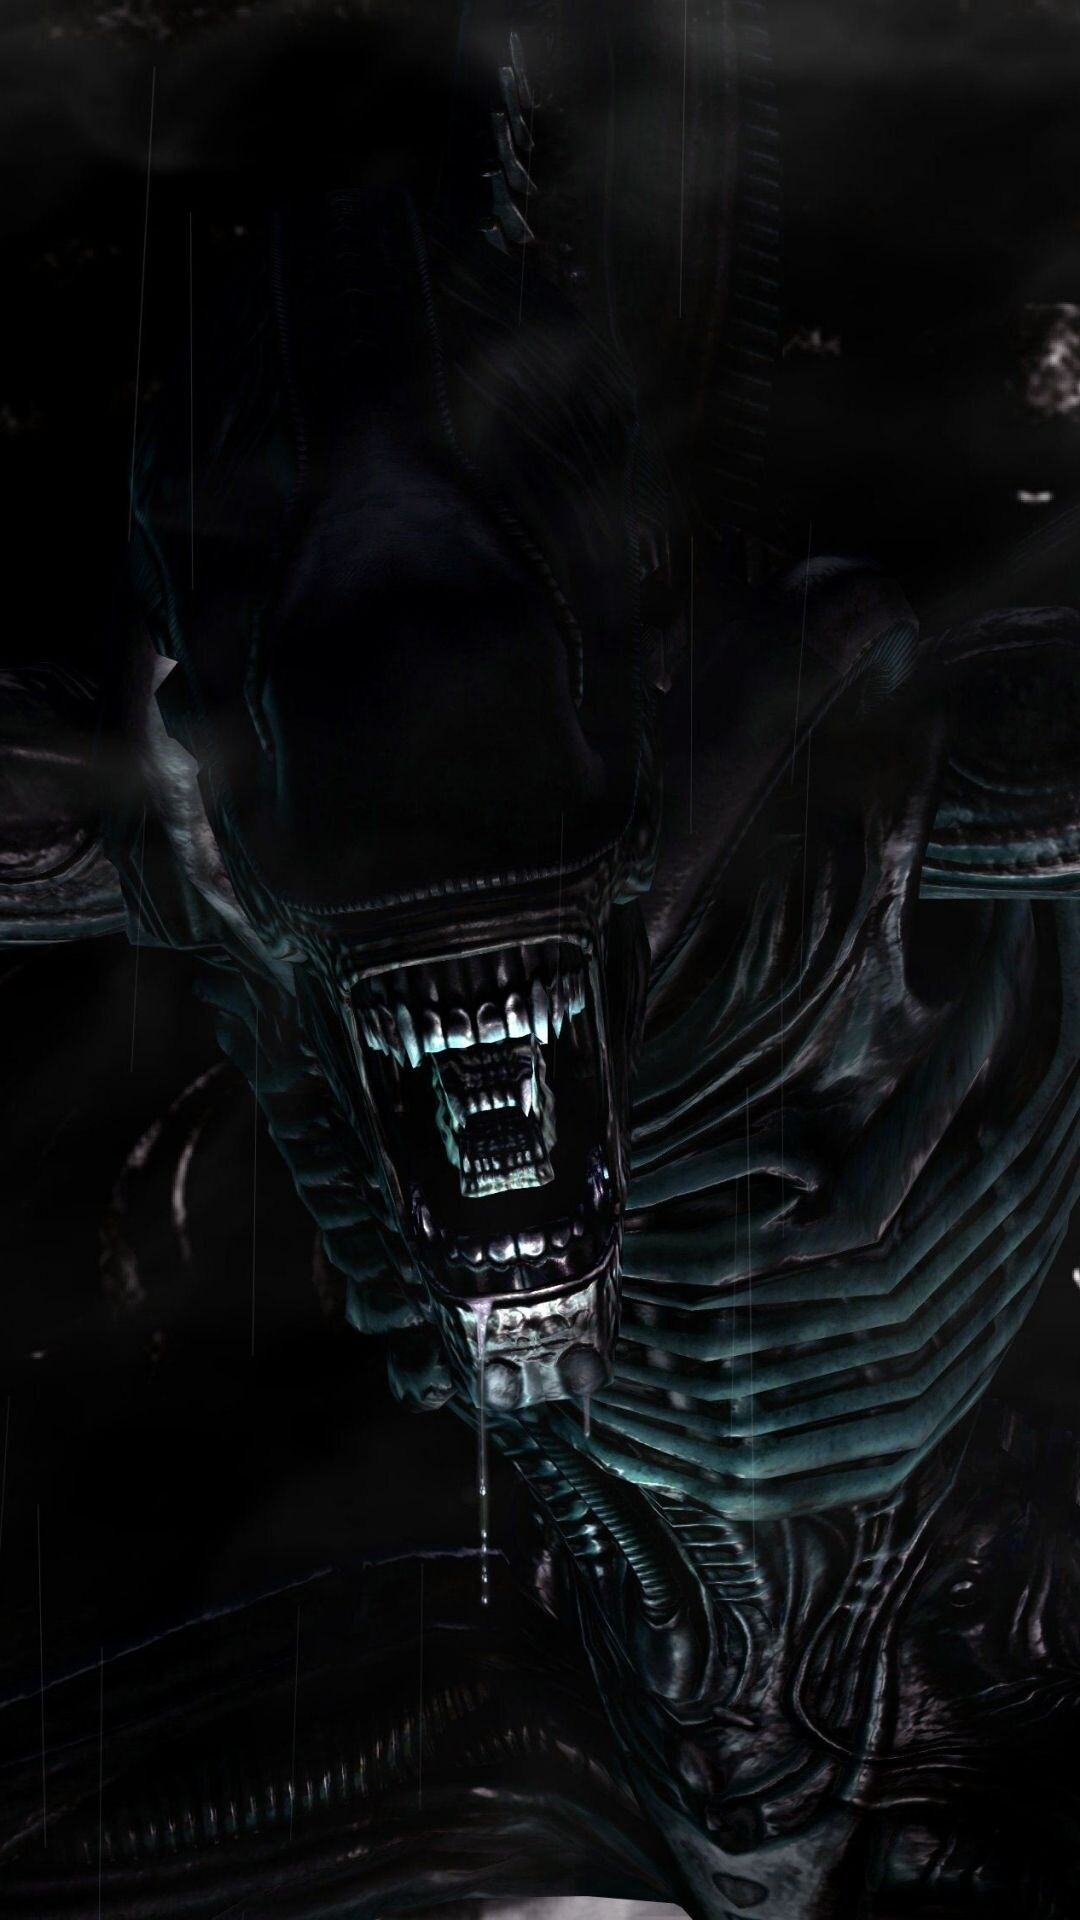 H.R. Giger: AVP, A First-Person Shooter Video Game, Rebellion Developments, 2010. 1080x1920 Full HD Background.